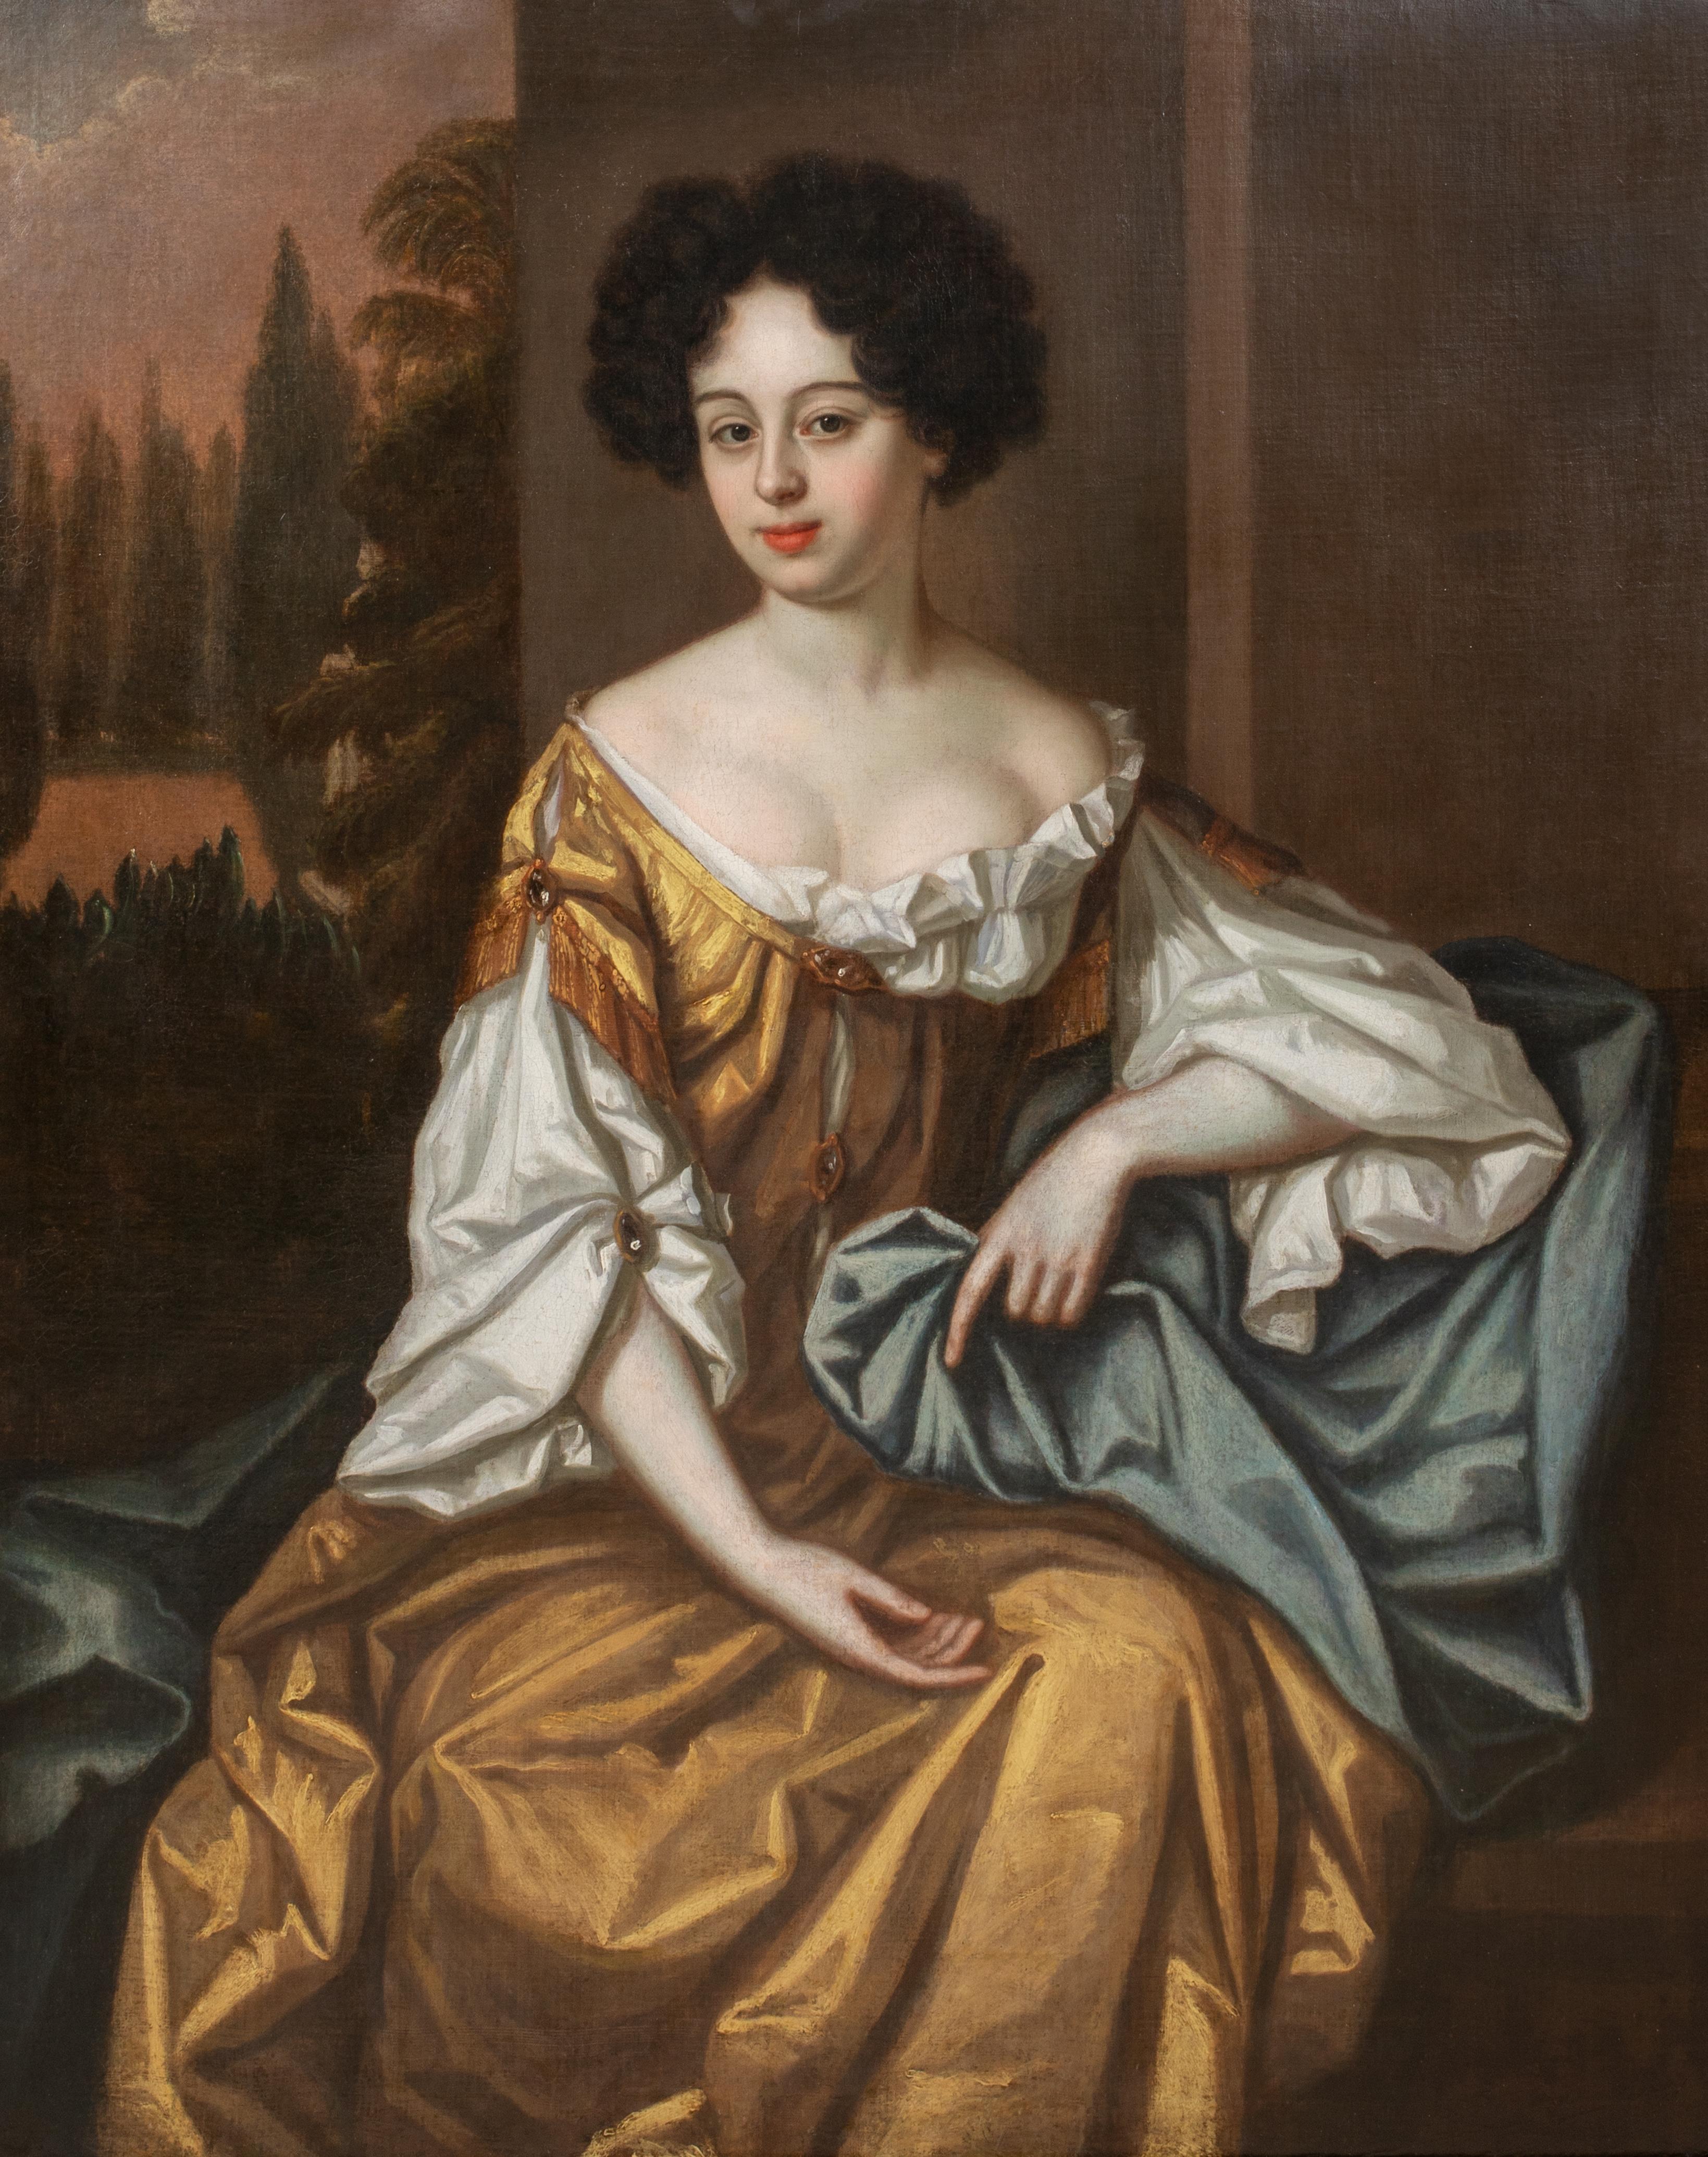 Portrait Louise de Kéroualle, Duchess of Portsmouth, 17th Century 

Sir Peter Lely (1618-1680)

Large 17th Century portrait of Louis de Keroualle, Duchess of Portsmouth oil on canvas. Excellent quality and condition three quarter length portrait of